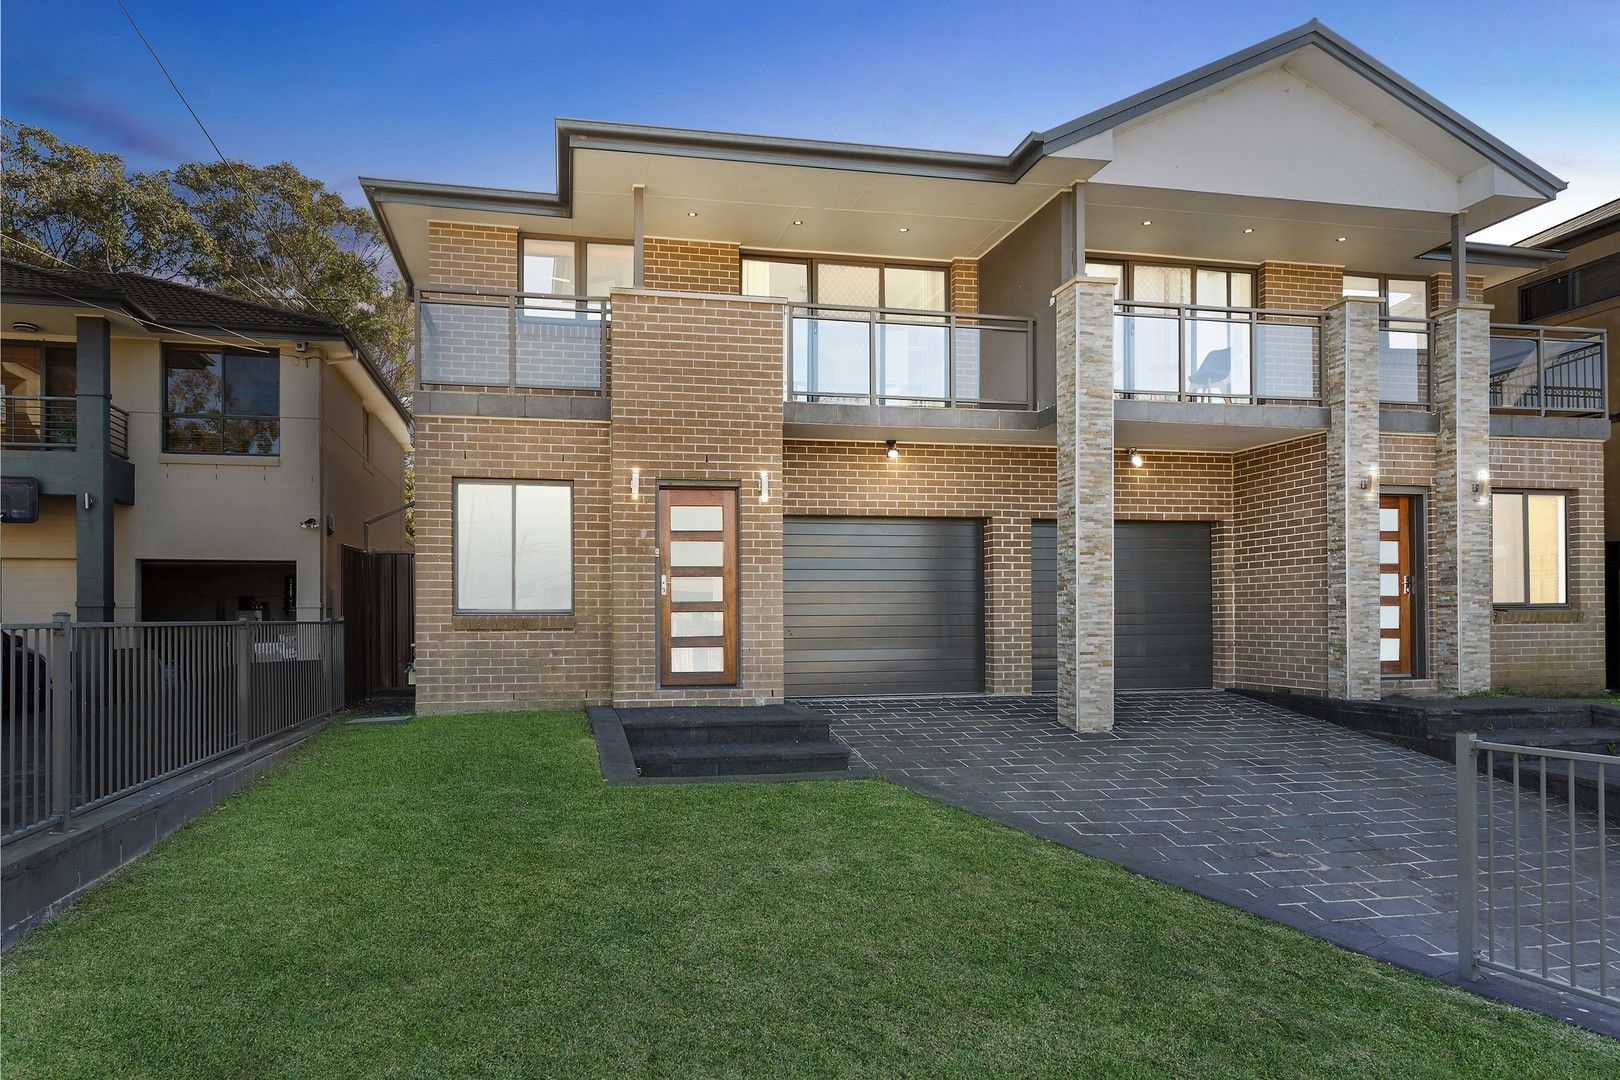 4 bedrooms Semi-Detached in 661 Henry Lawson Drive EAST HILLS NSW, 2213